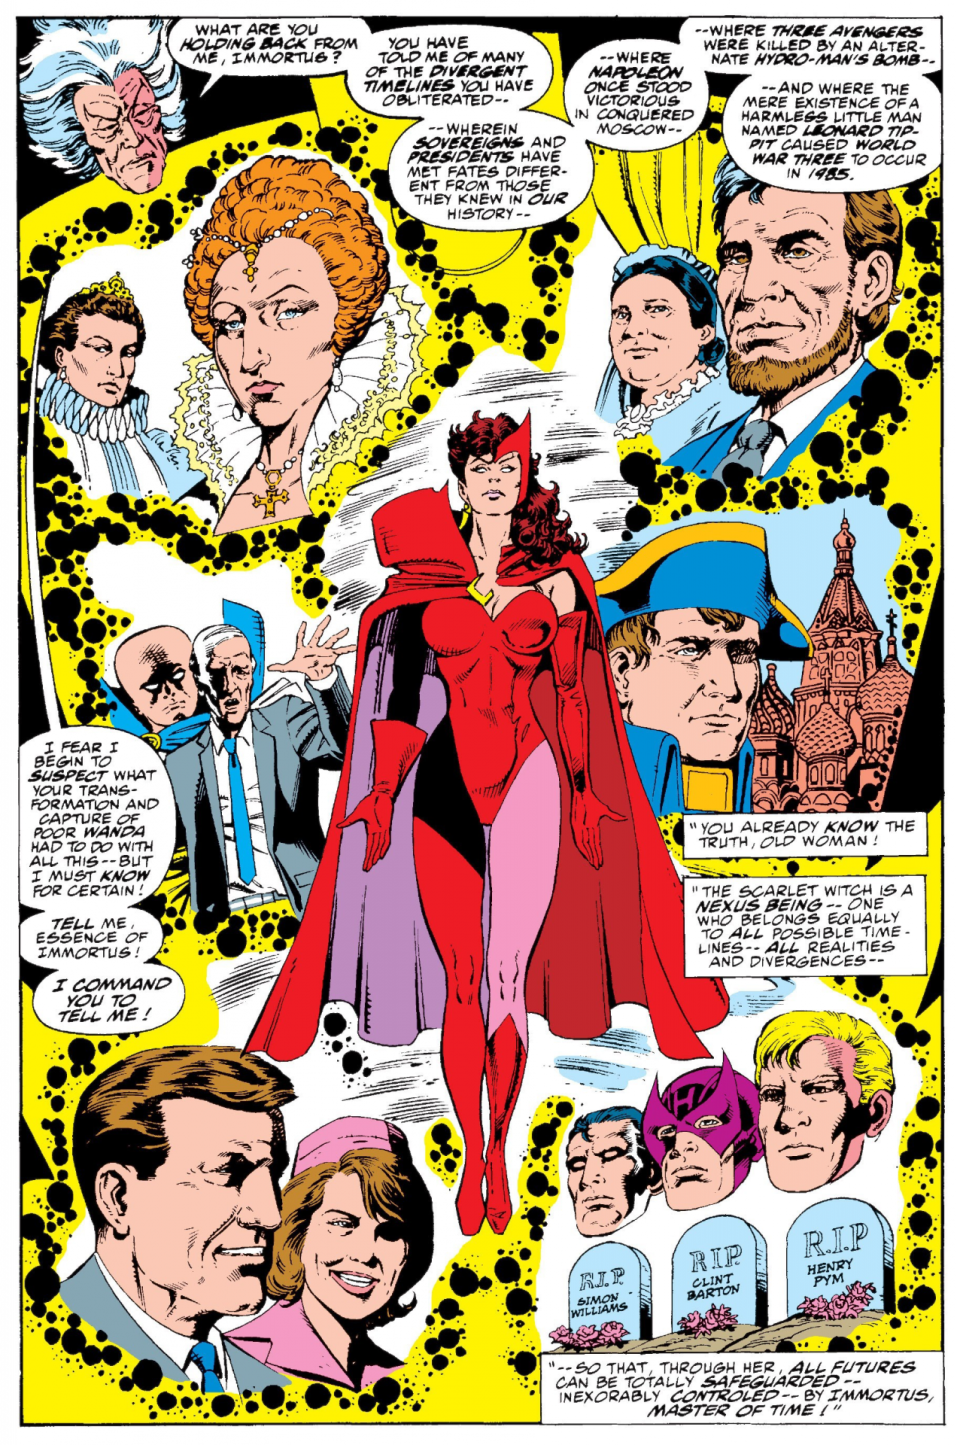 A page from Avengers West Coast #61 shows Scarlet Witch walking through Kirby Crackle as we learn she is a Nexus Being